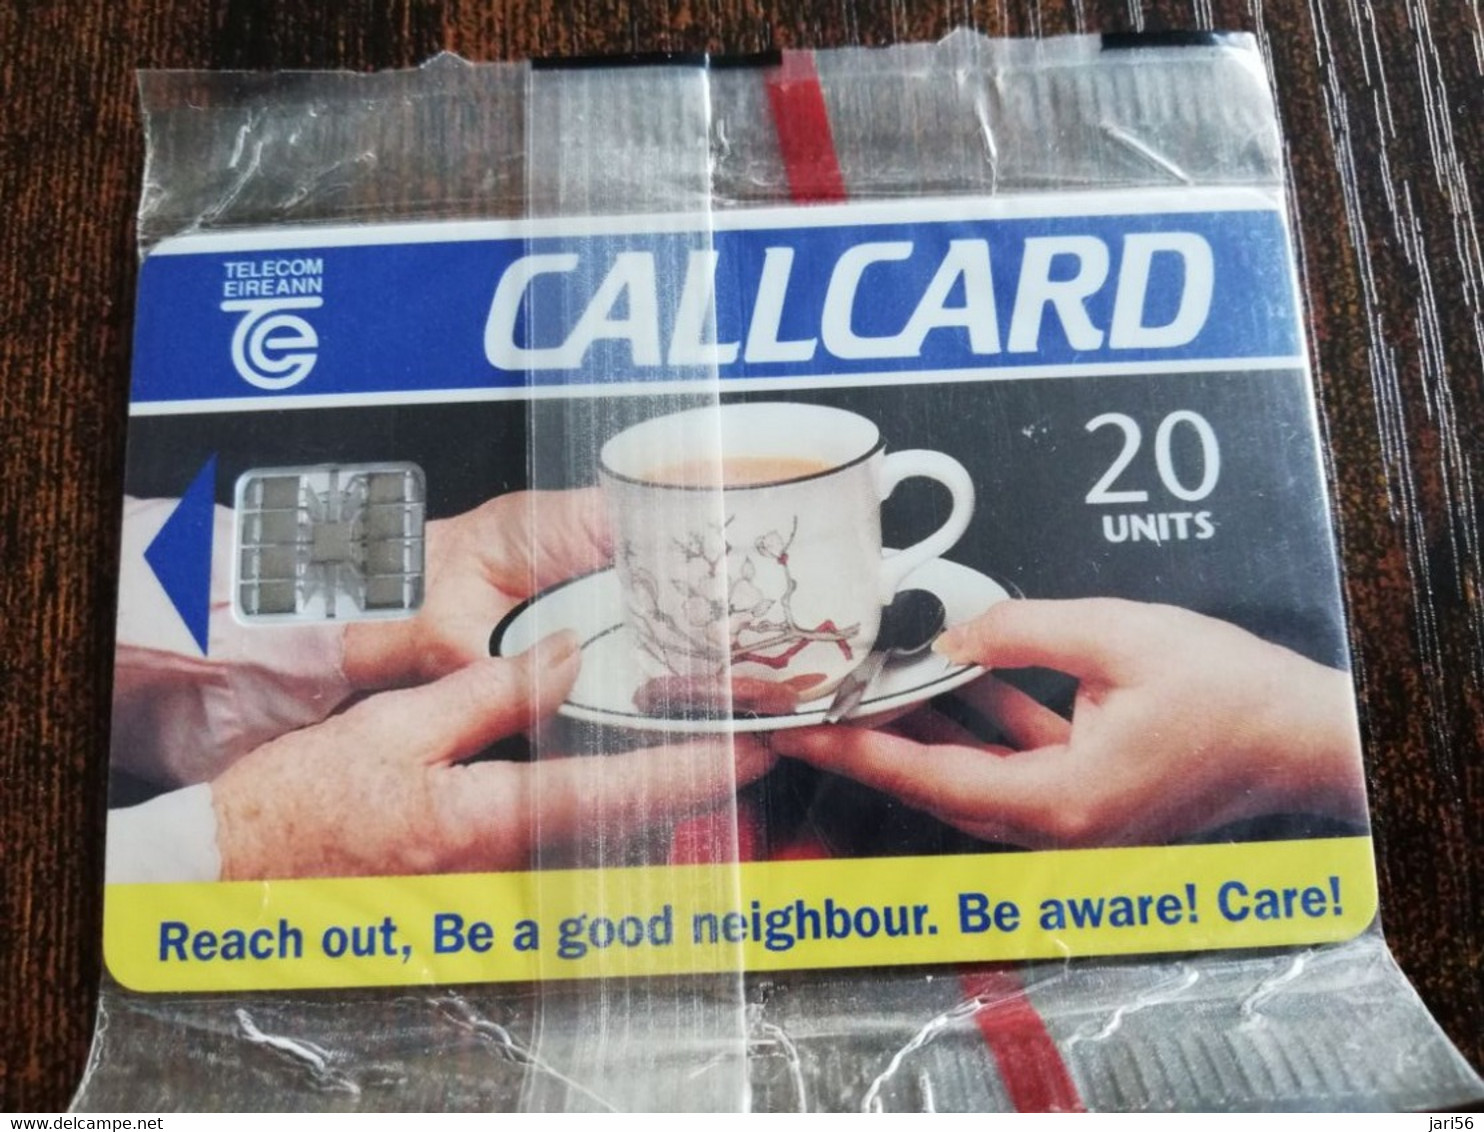 IRELAND /IERLANDE   CHIPCARD 20  UNITS   REACH OUT BE A GOOD NEIGHBOUR       MINT CARD IN WRAPPER   ** 4390** - Ireland